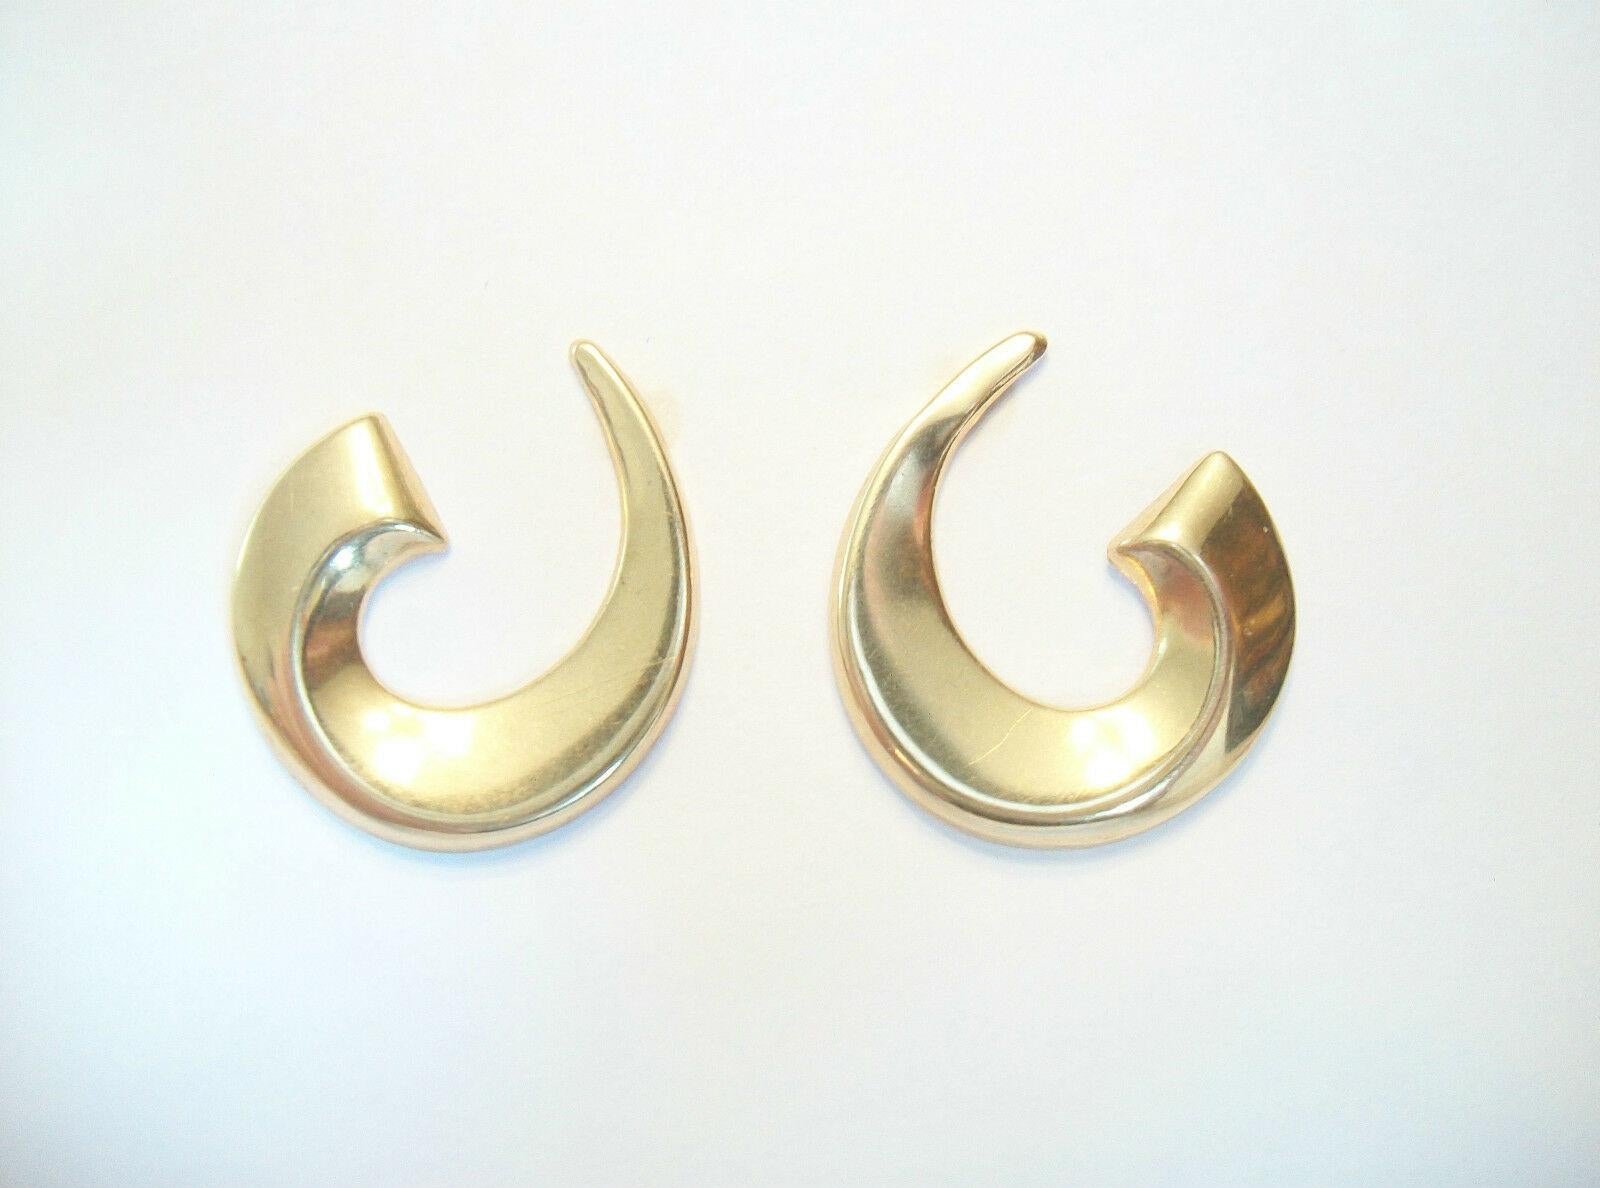 Vintage 14k Yellow Gold 'C' Scroll Earrings, Signed, U.S, Late 20th Century In Good Condition For Sale In Chatham, CA